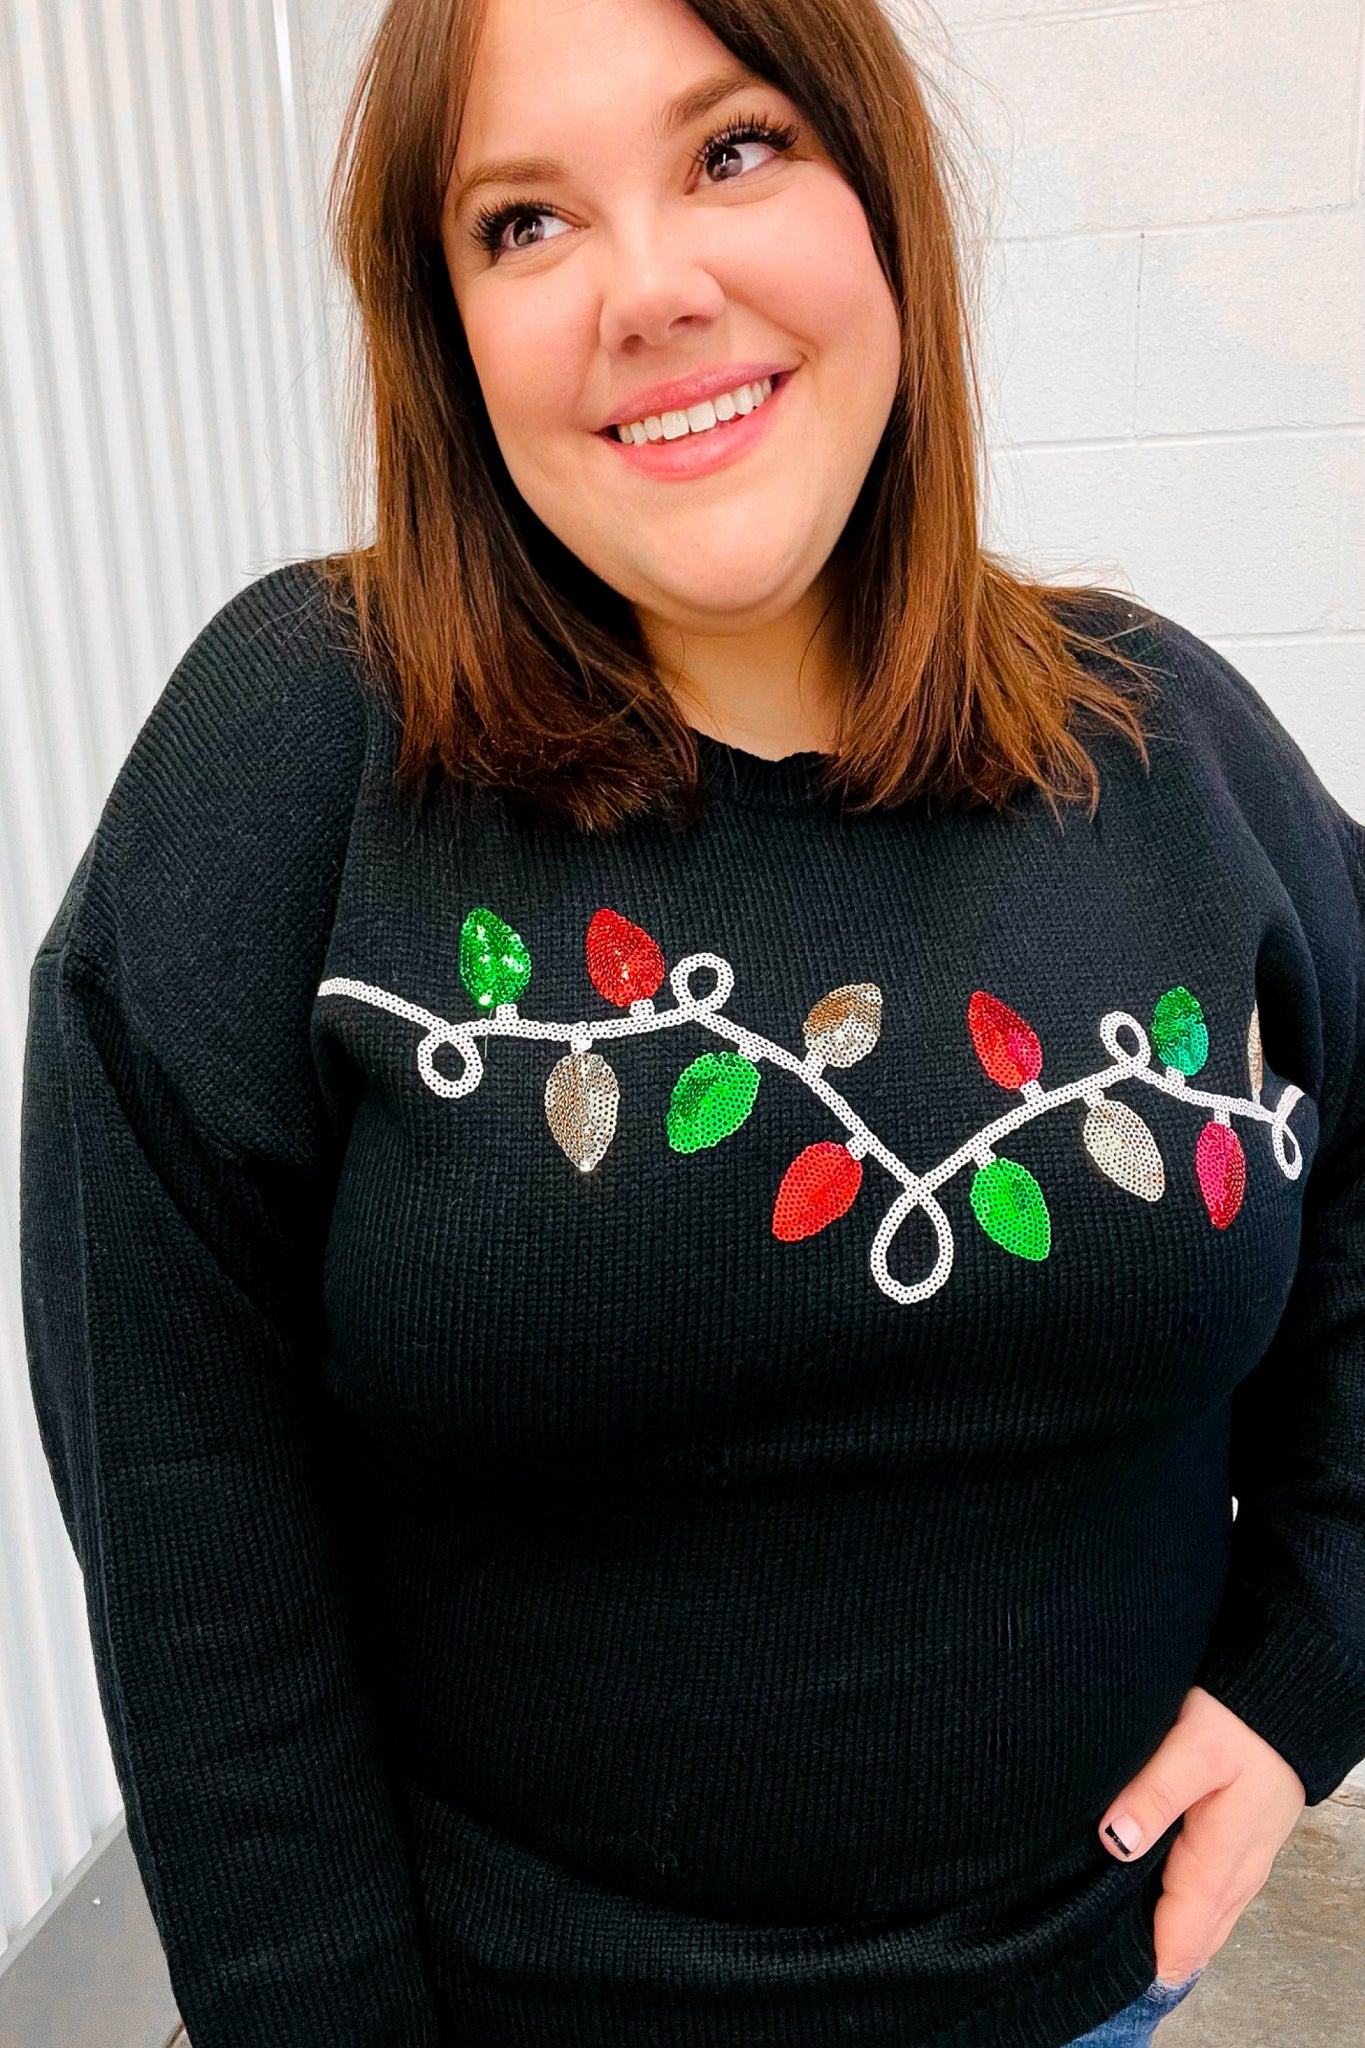 It's Lit Black Sequin Embroidered Christmas Lights Sweater